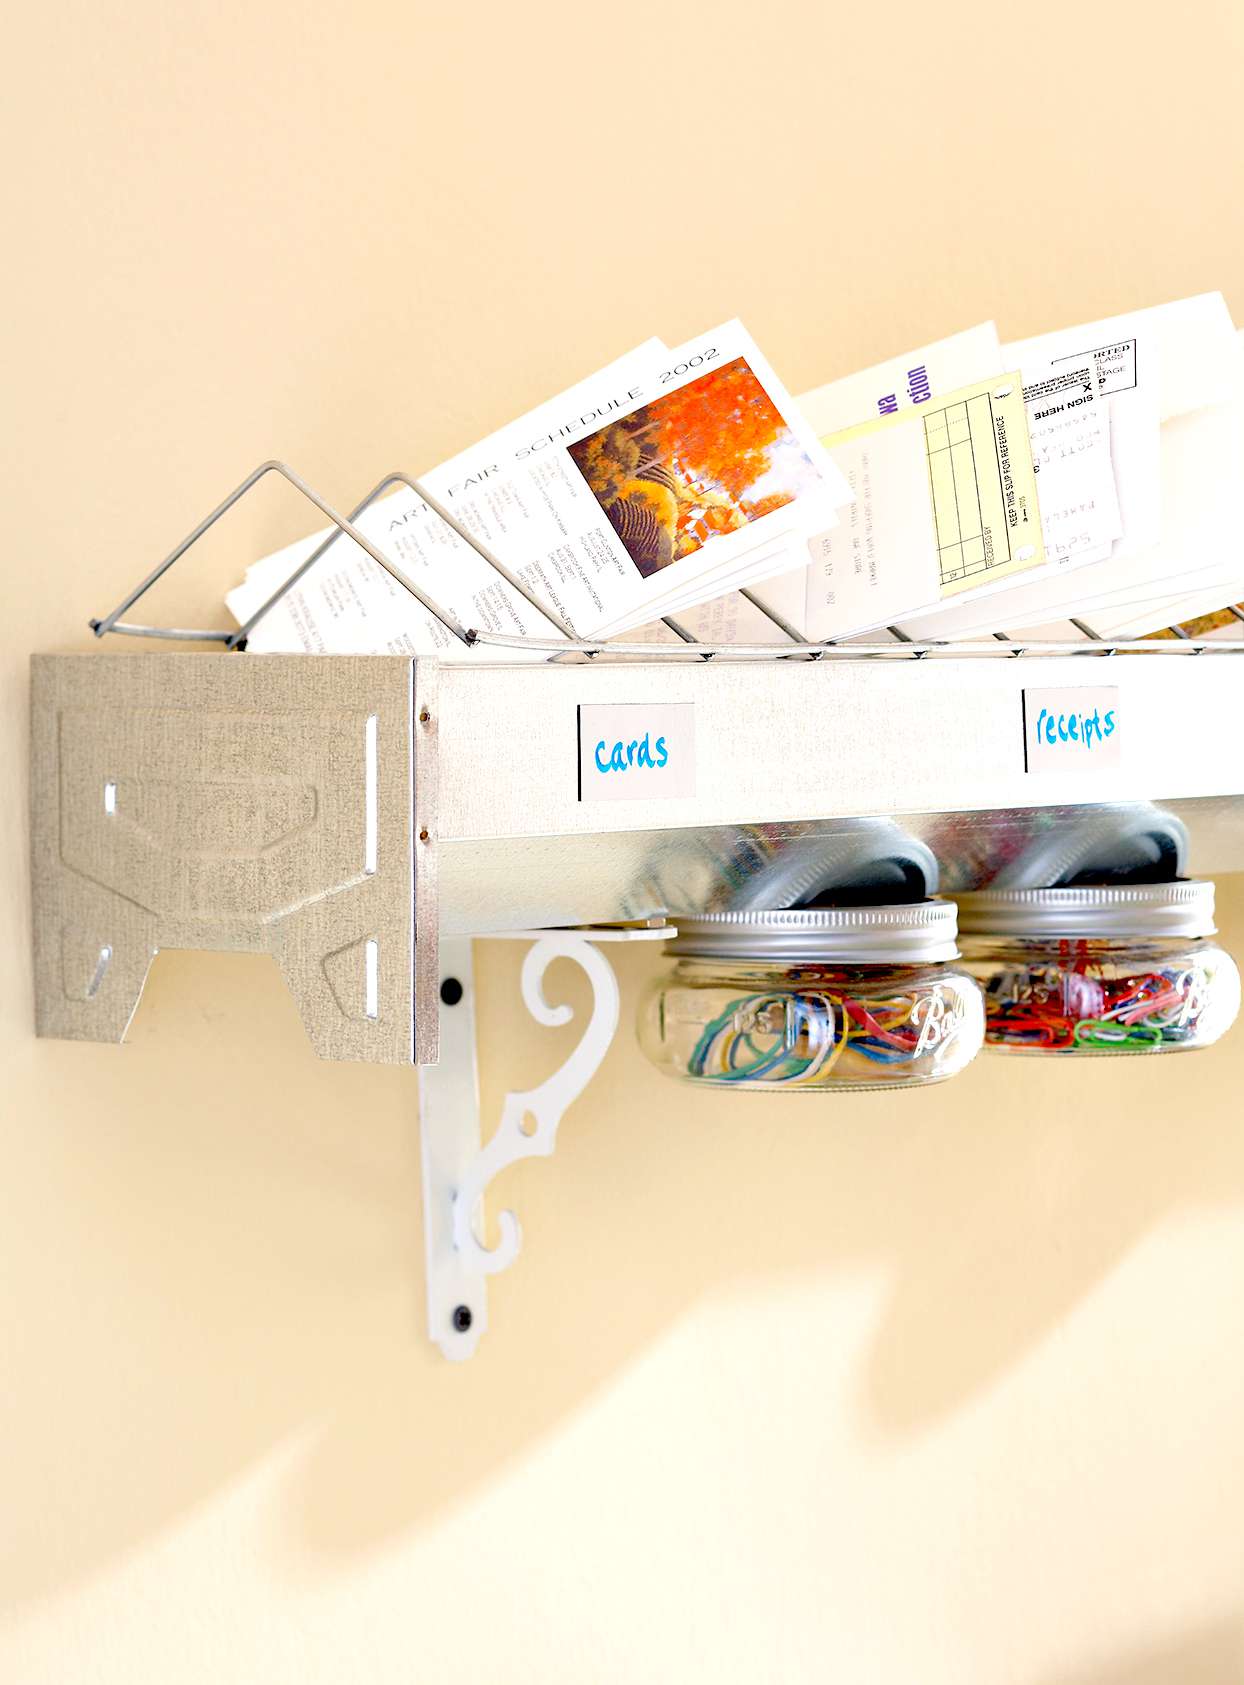 Metal hanging organizer with papers and other items